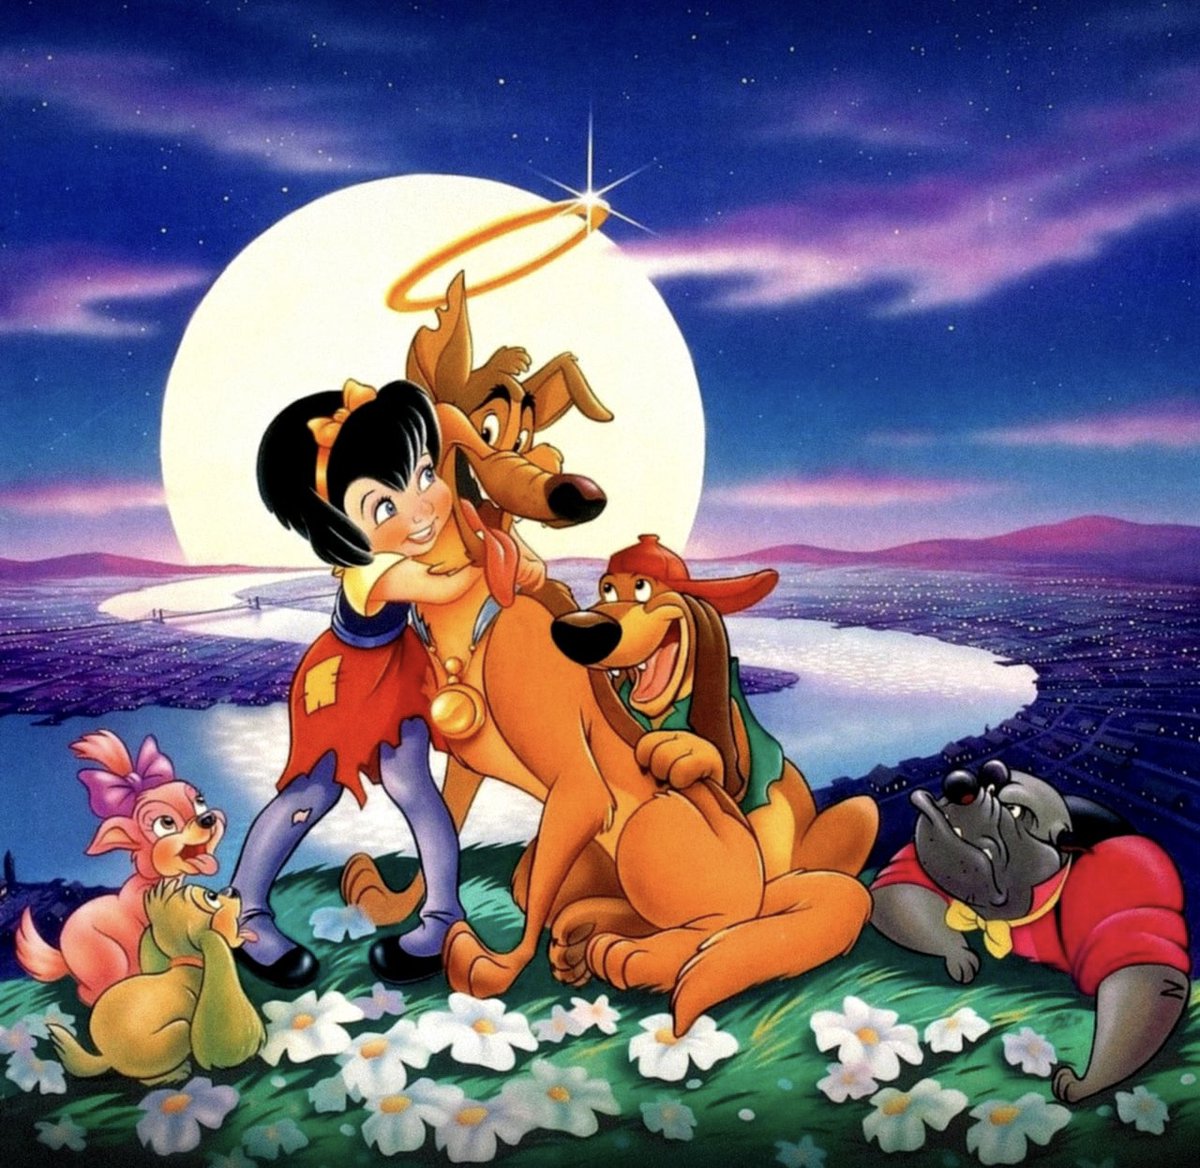 Don Bluth’s #AllDogsGoToHeaven opened in theaters #onthisday in 1989!
#JudithBarsi #BurtReynolds #DomDeLuise #VicTayback #LoniAnderson #MelbaMoore #CharlesNelsonReilly #KenPage #RobFuller #GodfreyQuigley #AnnaManahan #CandyDevineMBE #DonBluth #GaryGoldman #DanKuenster #RalphBurns